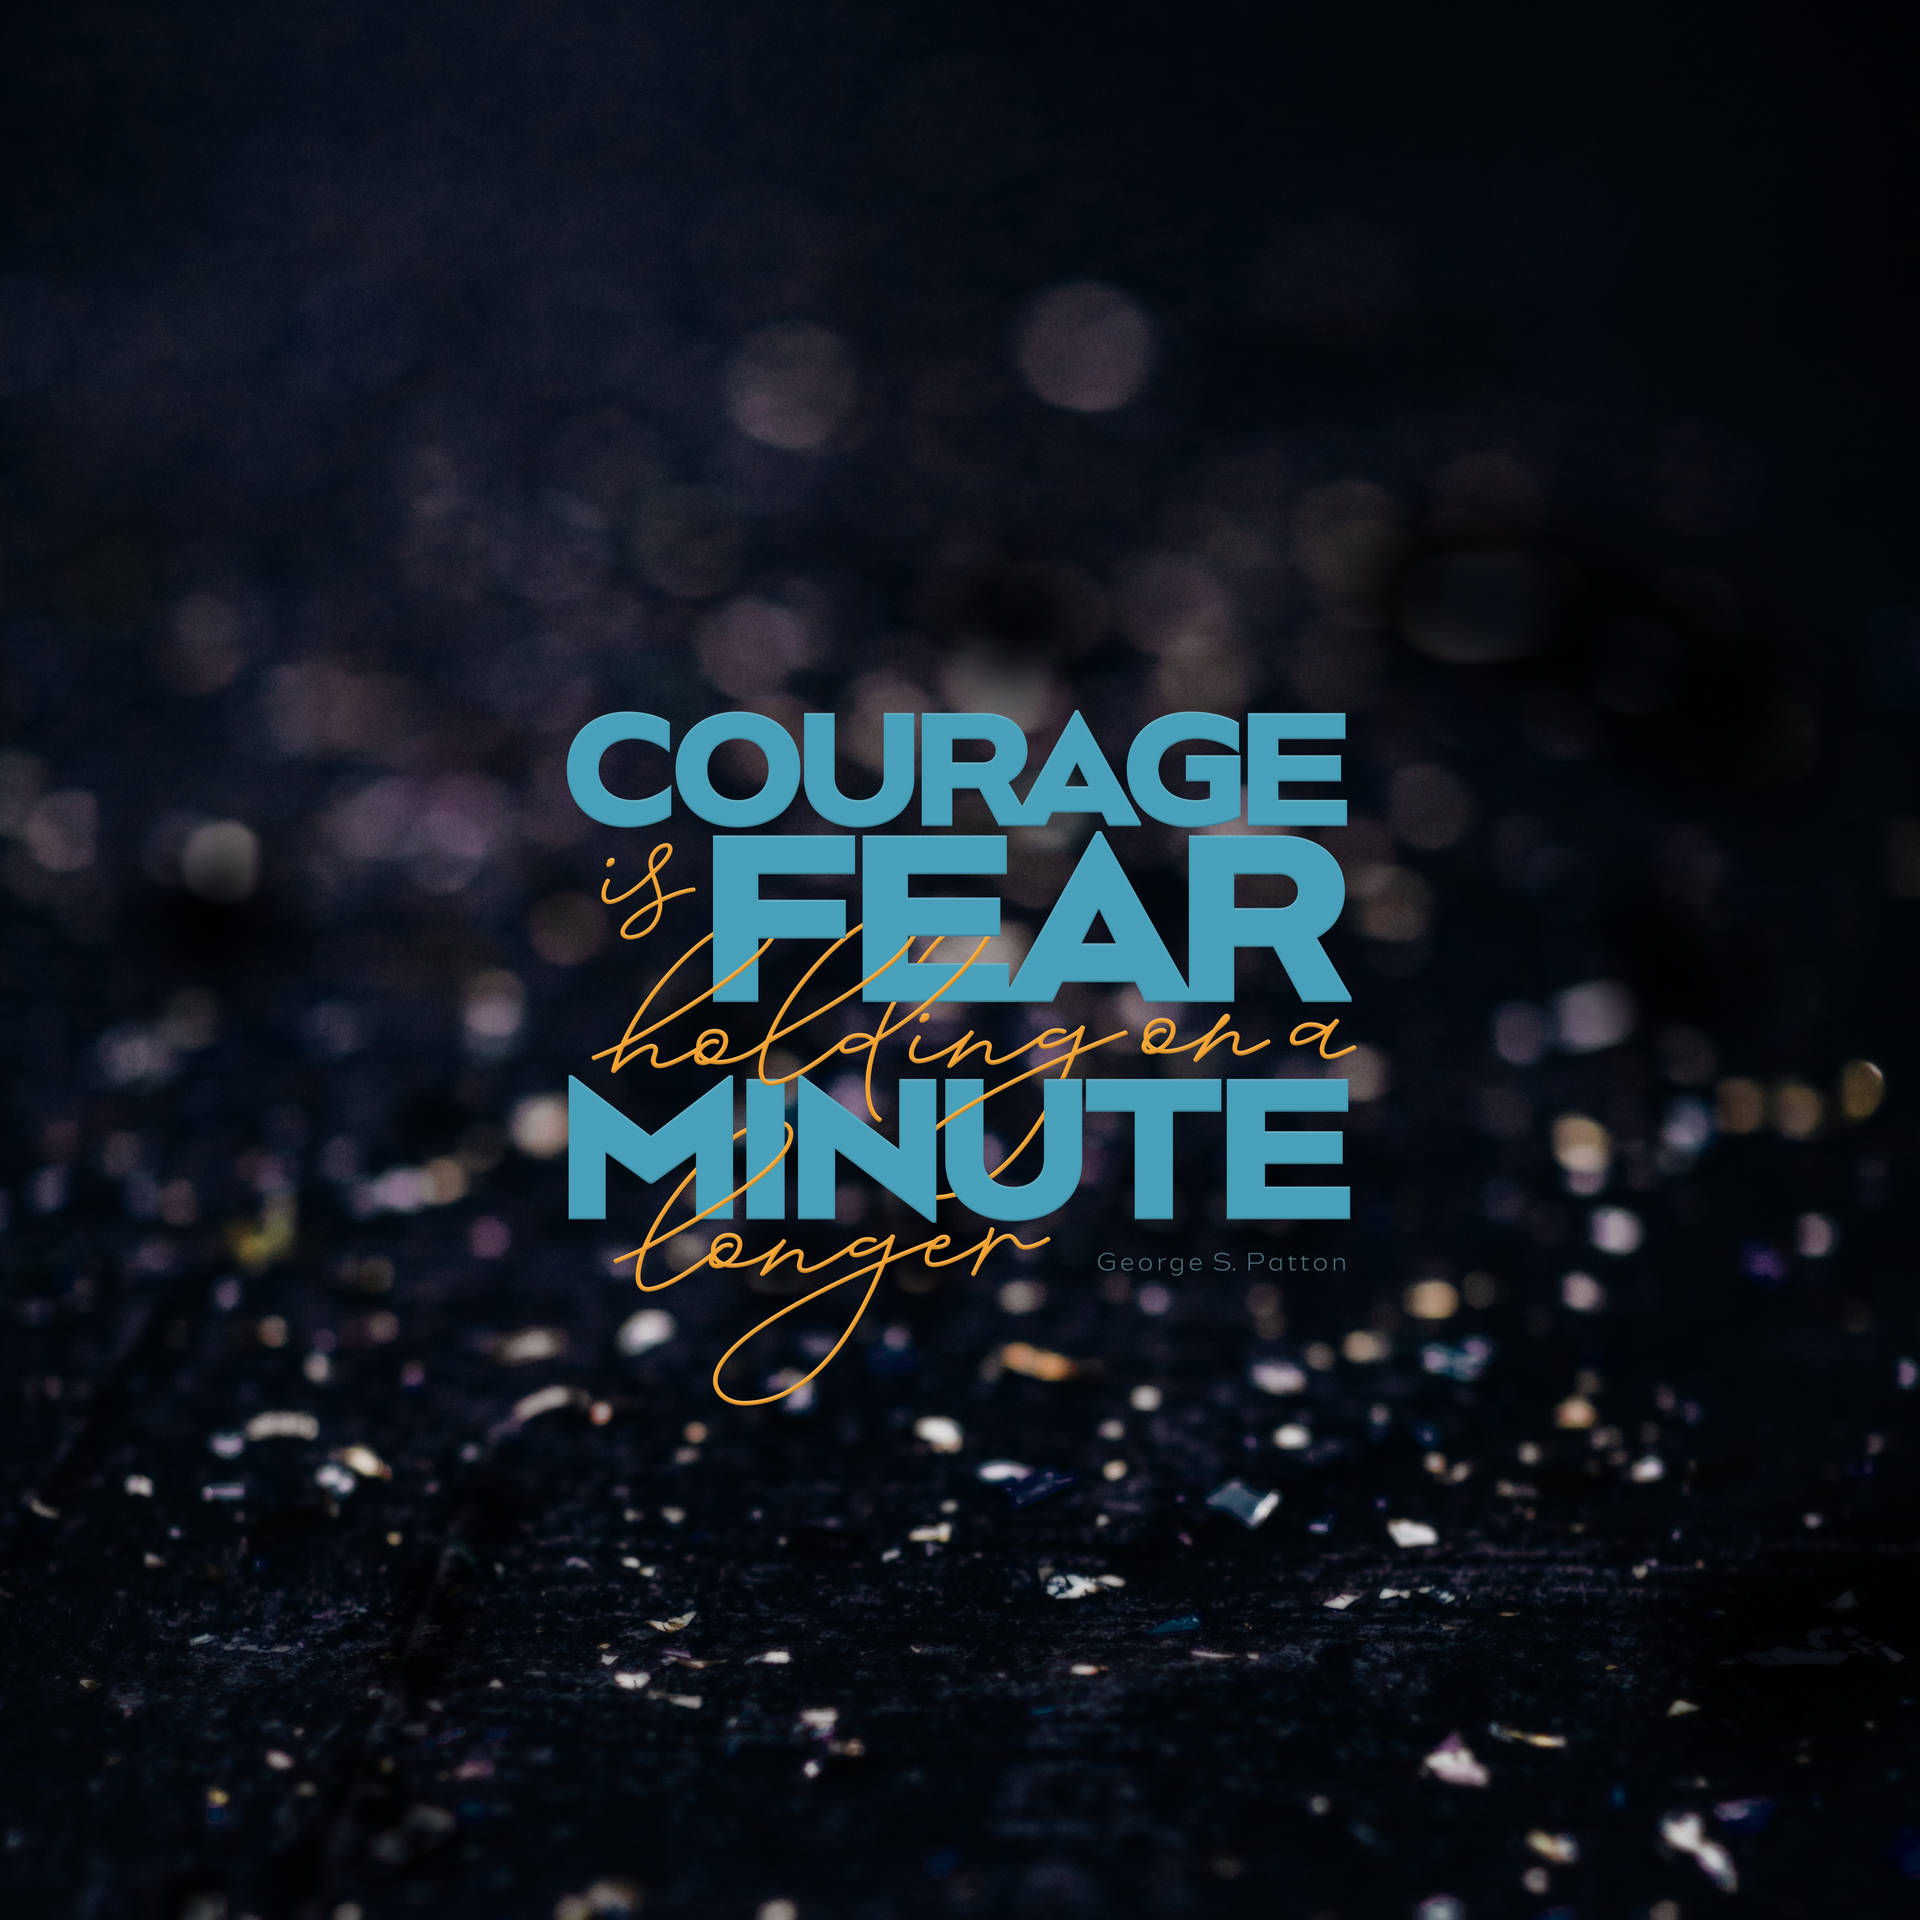 Courage Is Fear Quotes Wallpaper